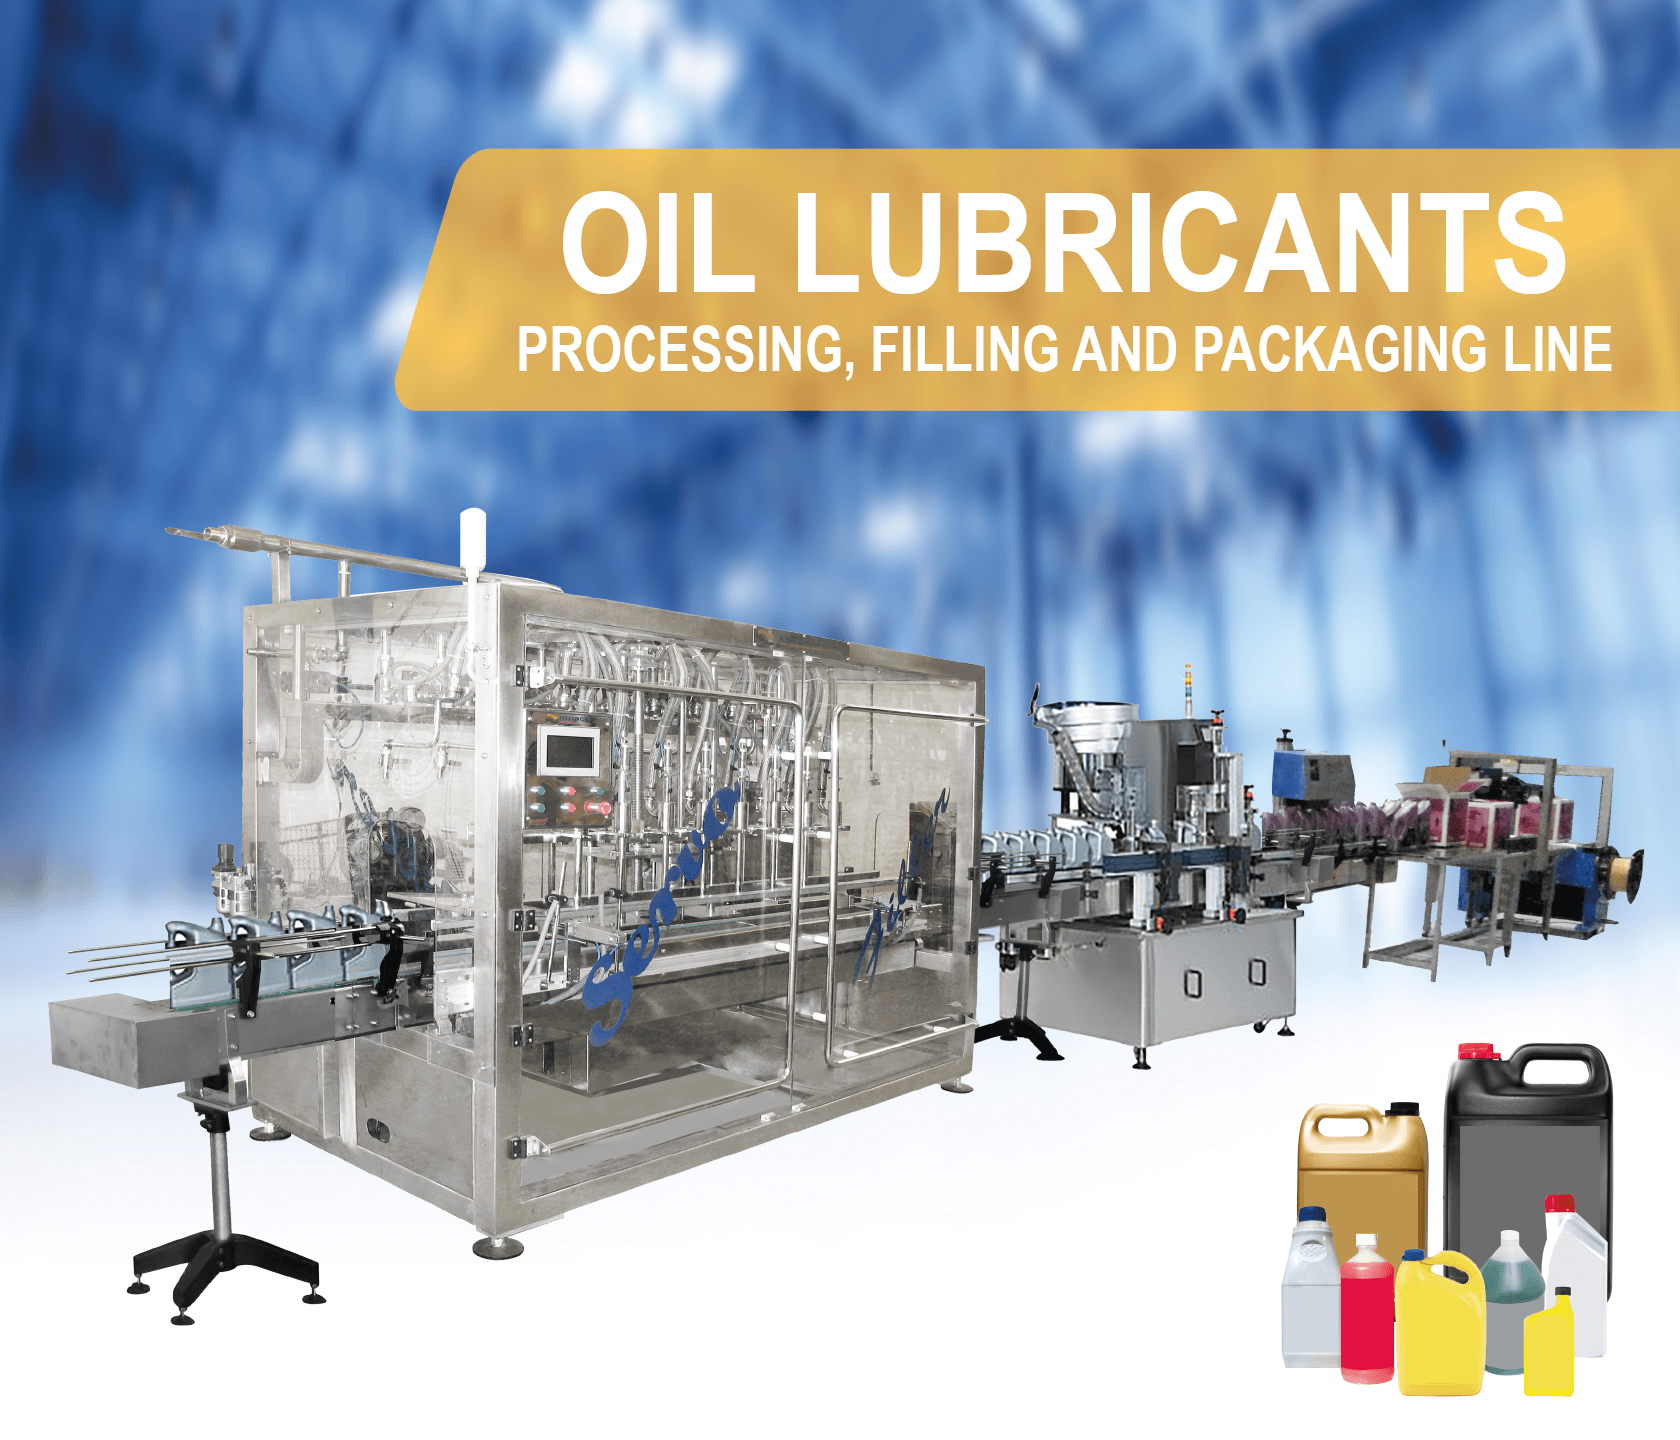 Oil Lubricants Processing, Filling and Packaging Line